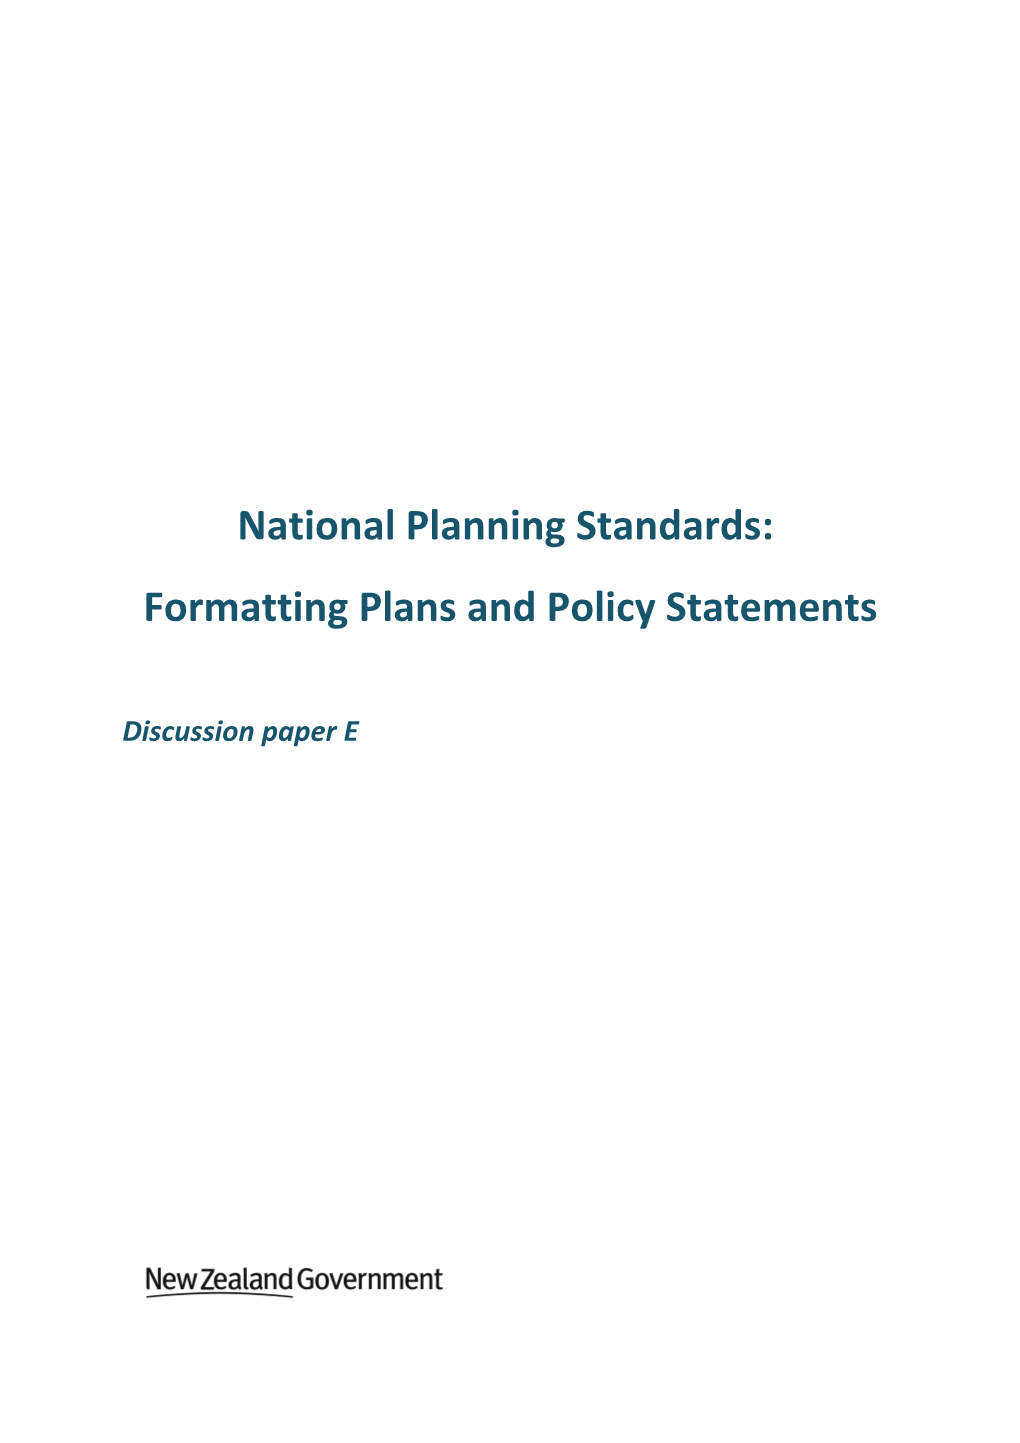 National Planning Standards: Formatting Plans and Policy Statements